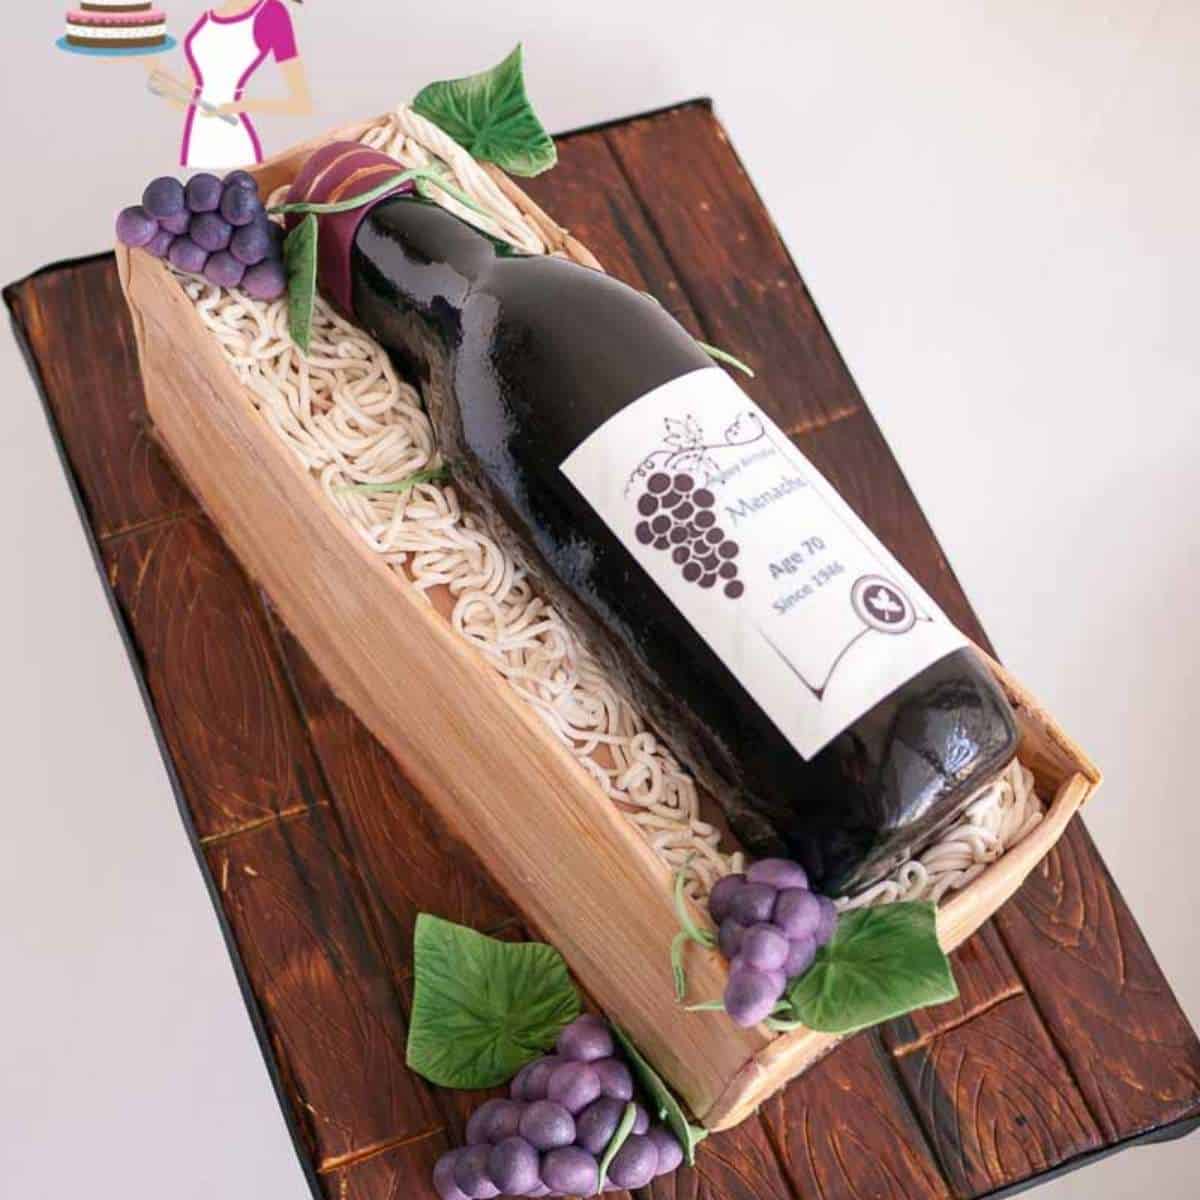 Wine Bottle and Crate Cake Tutorial